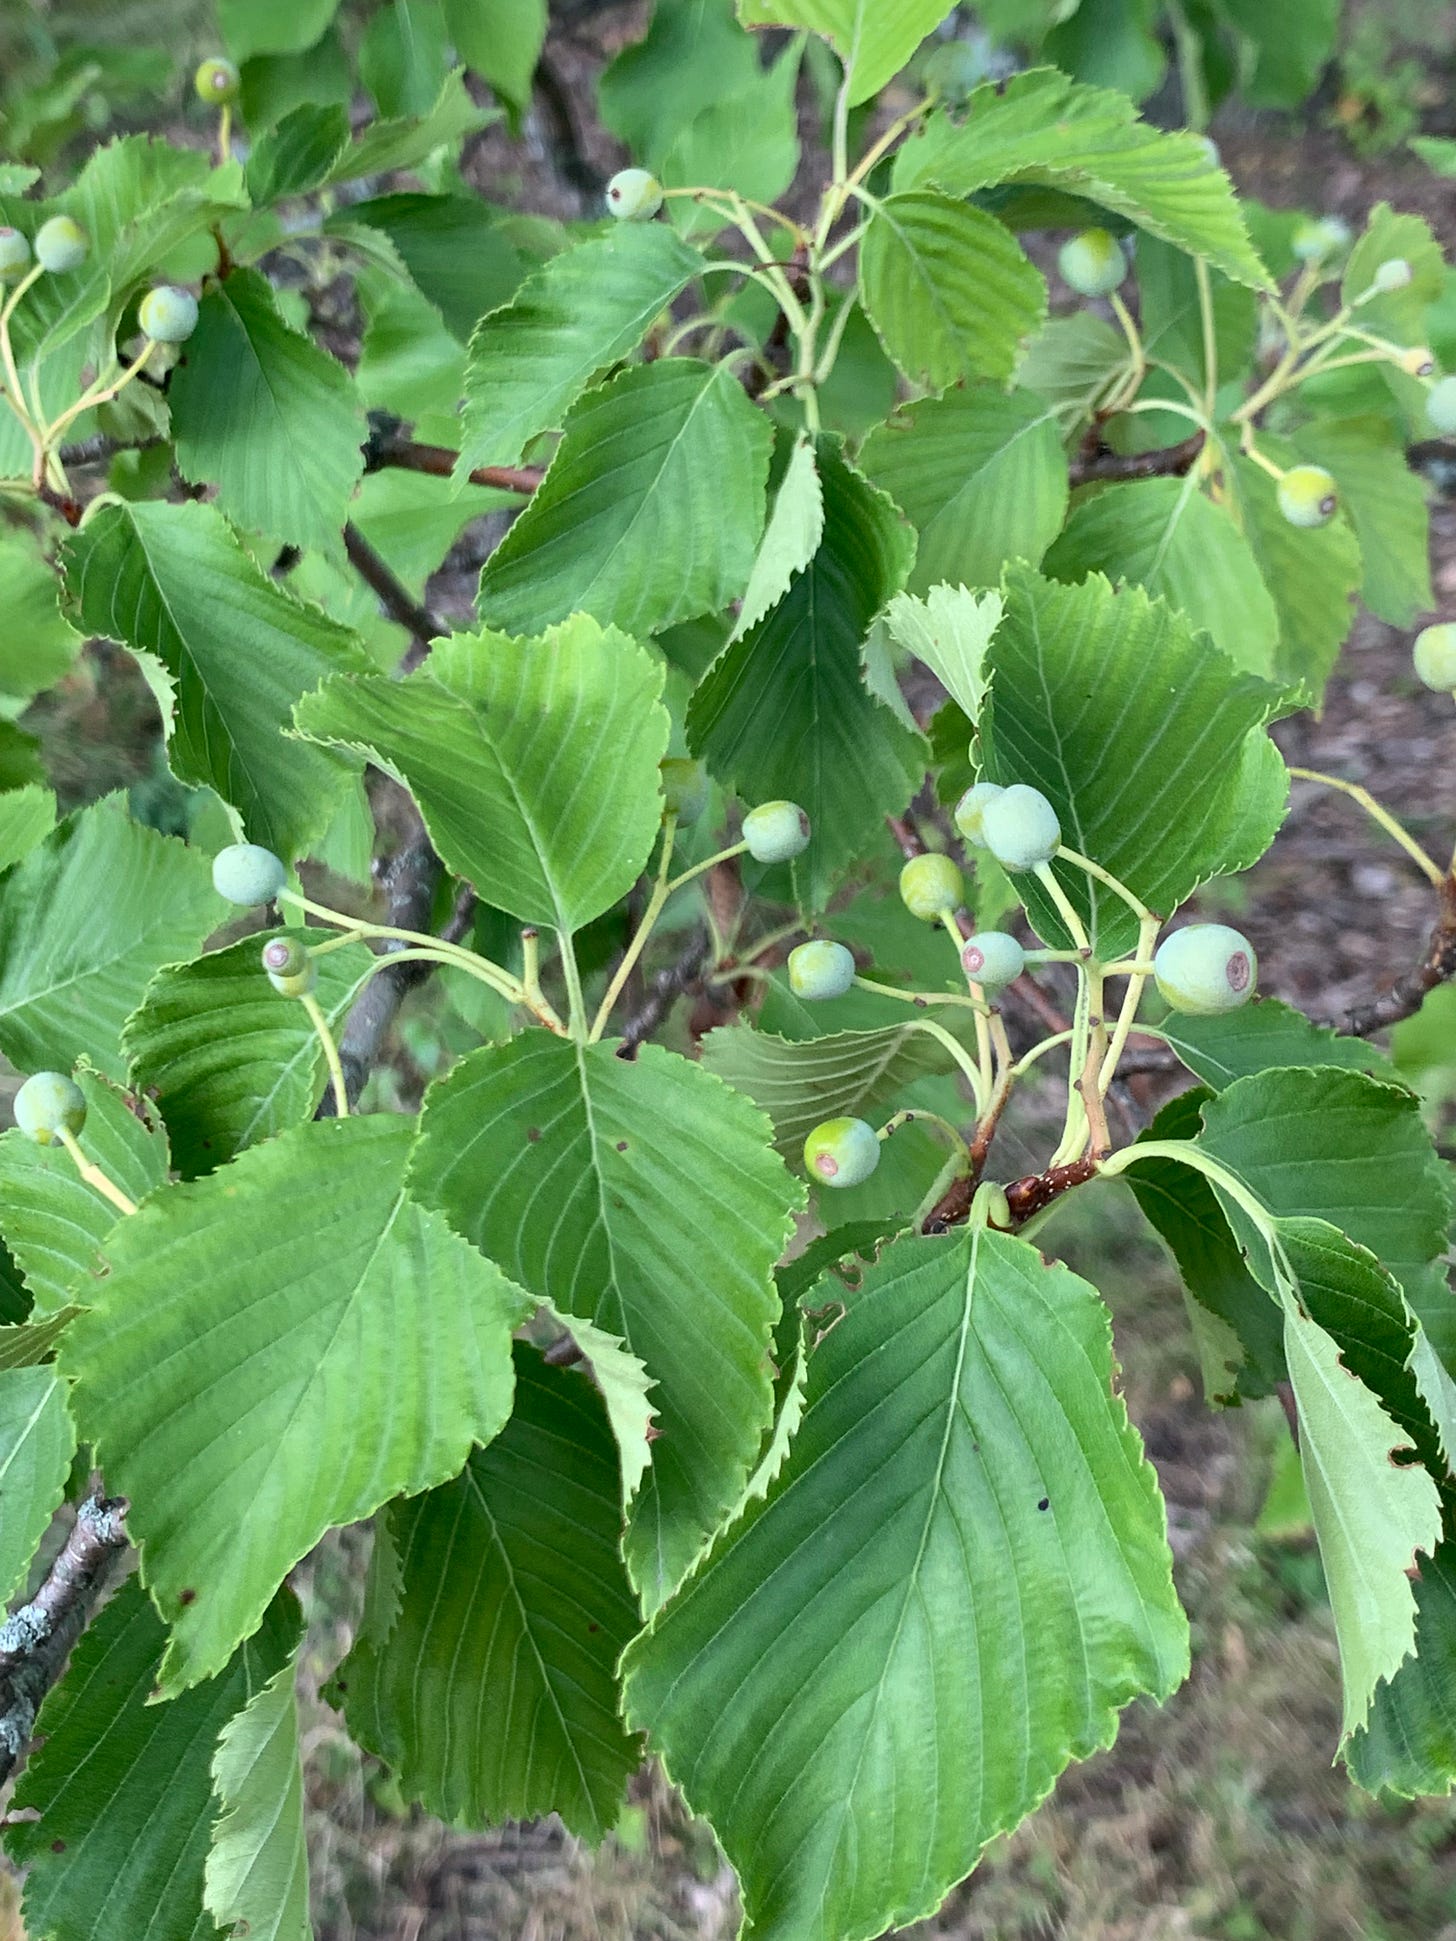 Green leaves with grey/green/white berries at the end of long skinny branches.